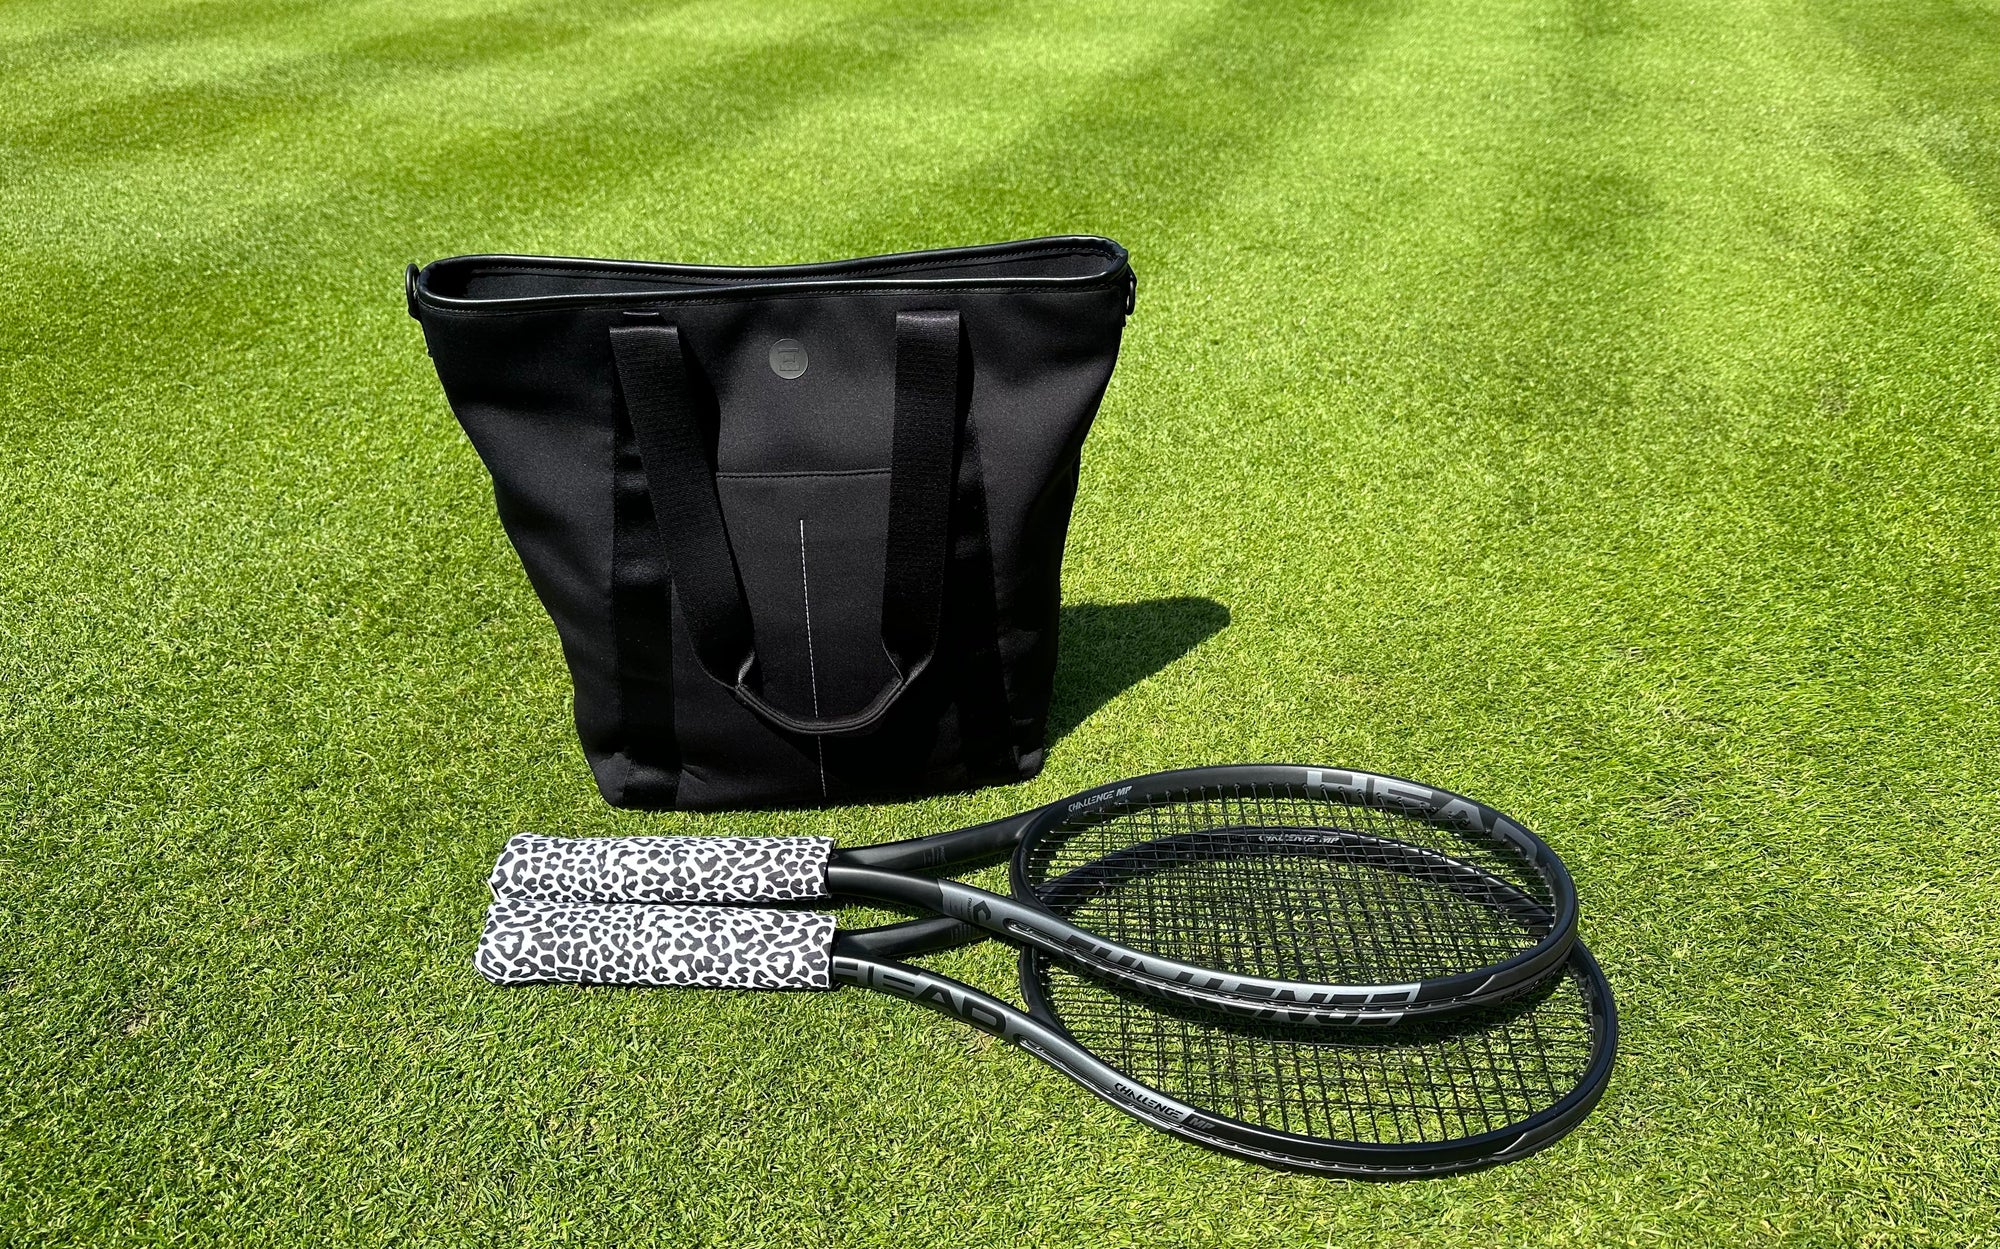 Epirus Transition Tote v2 for all racket sports